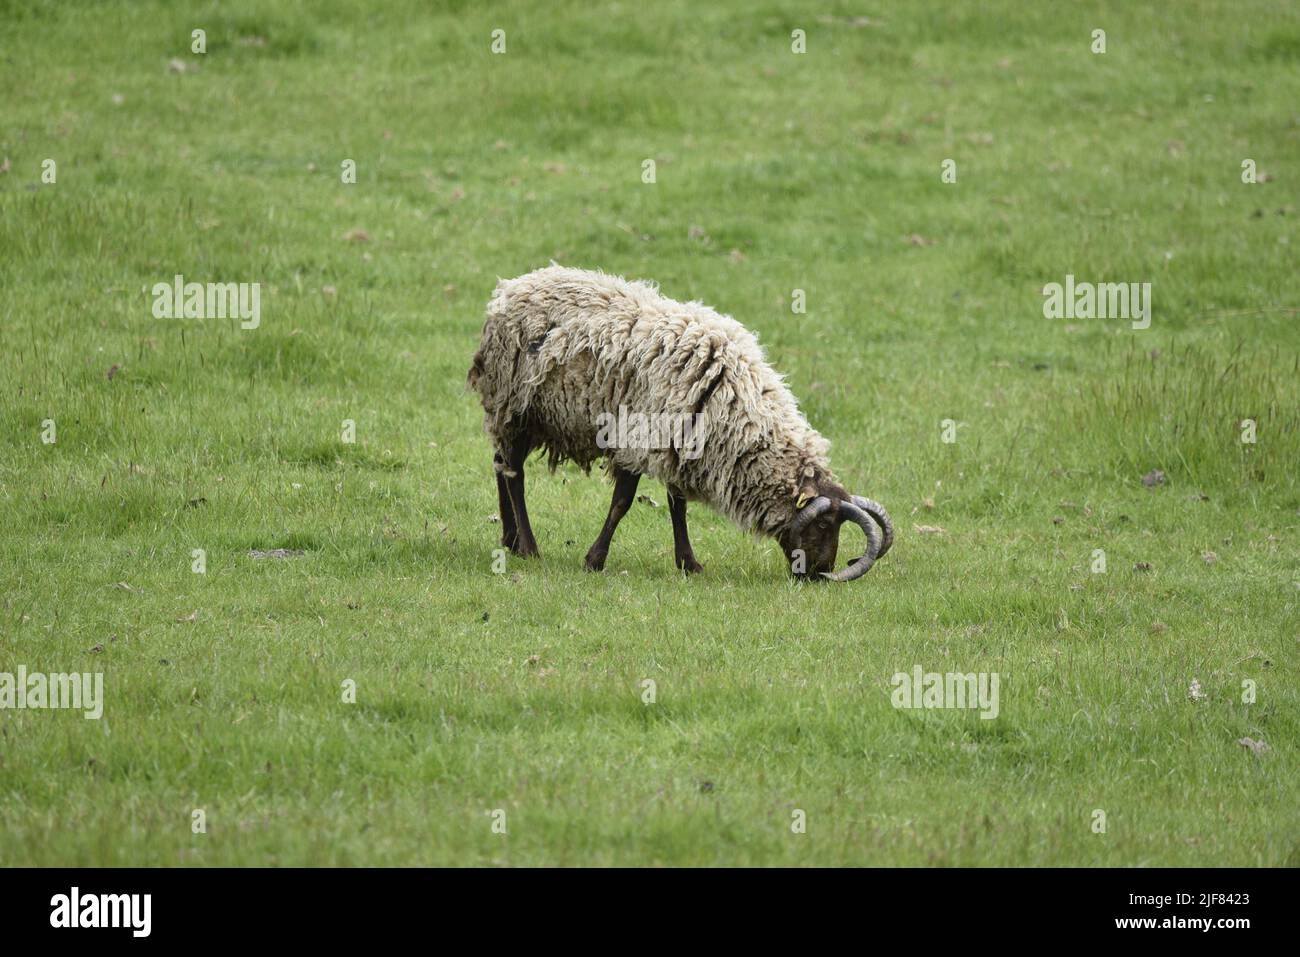 Right-Profile Close-Up Image of a Grazing Manx Loaghtan Sheep on a Field in Cregneash, Isle of Man, UK in June Stock Photo